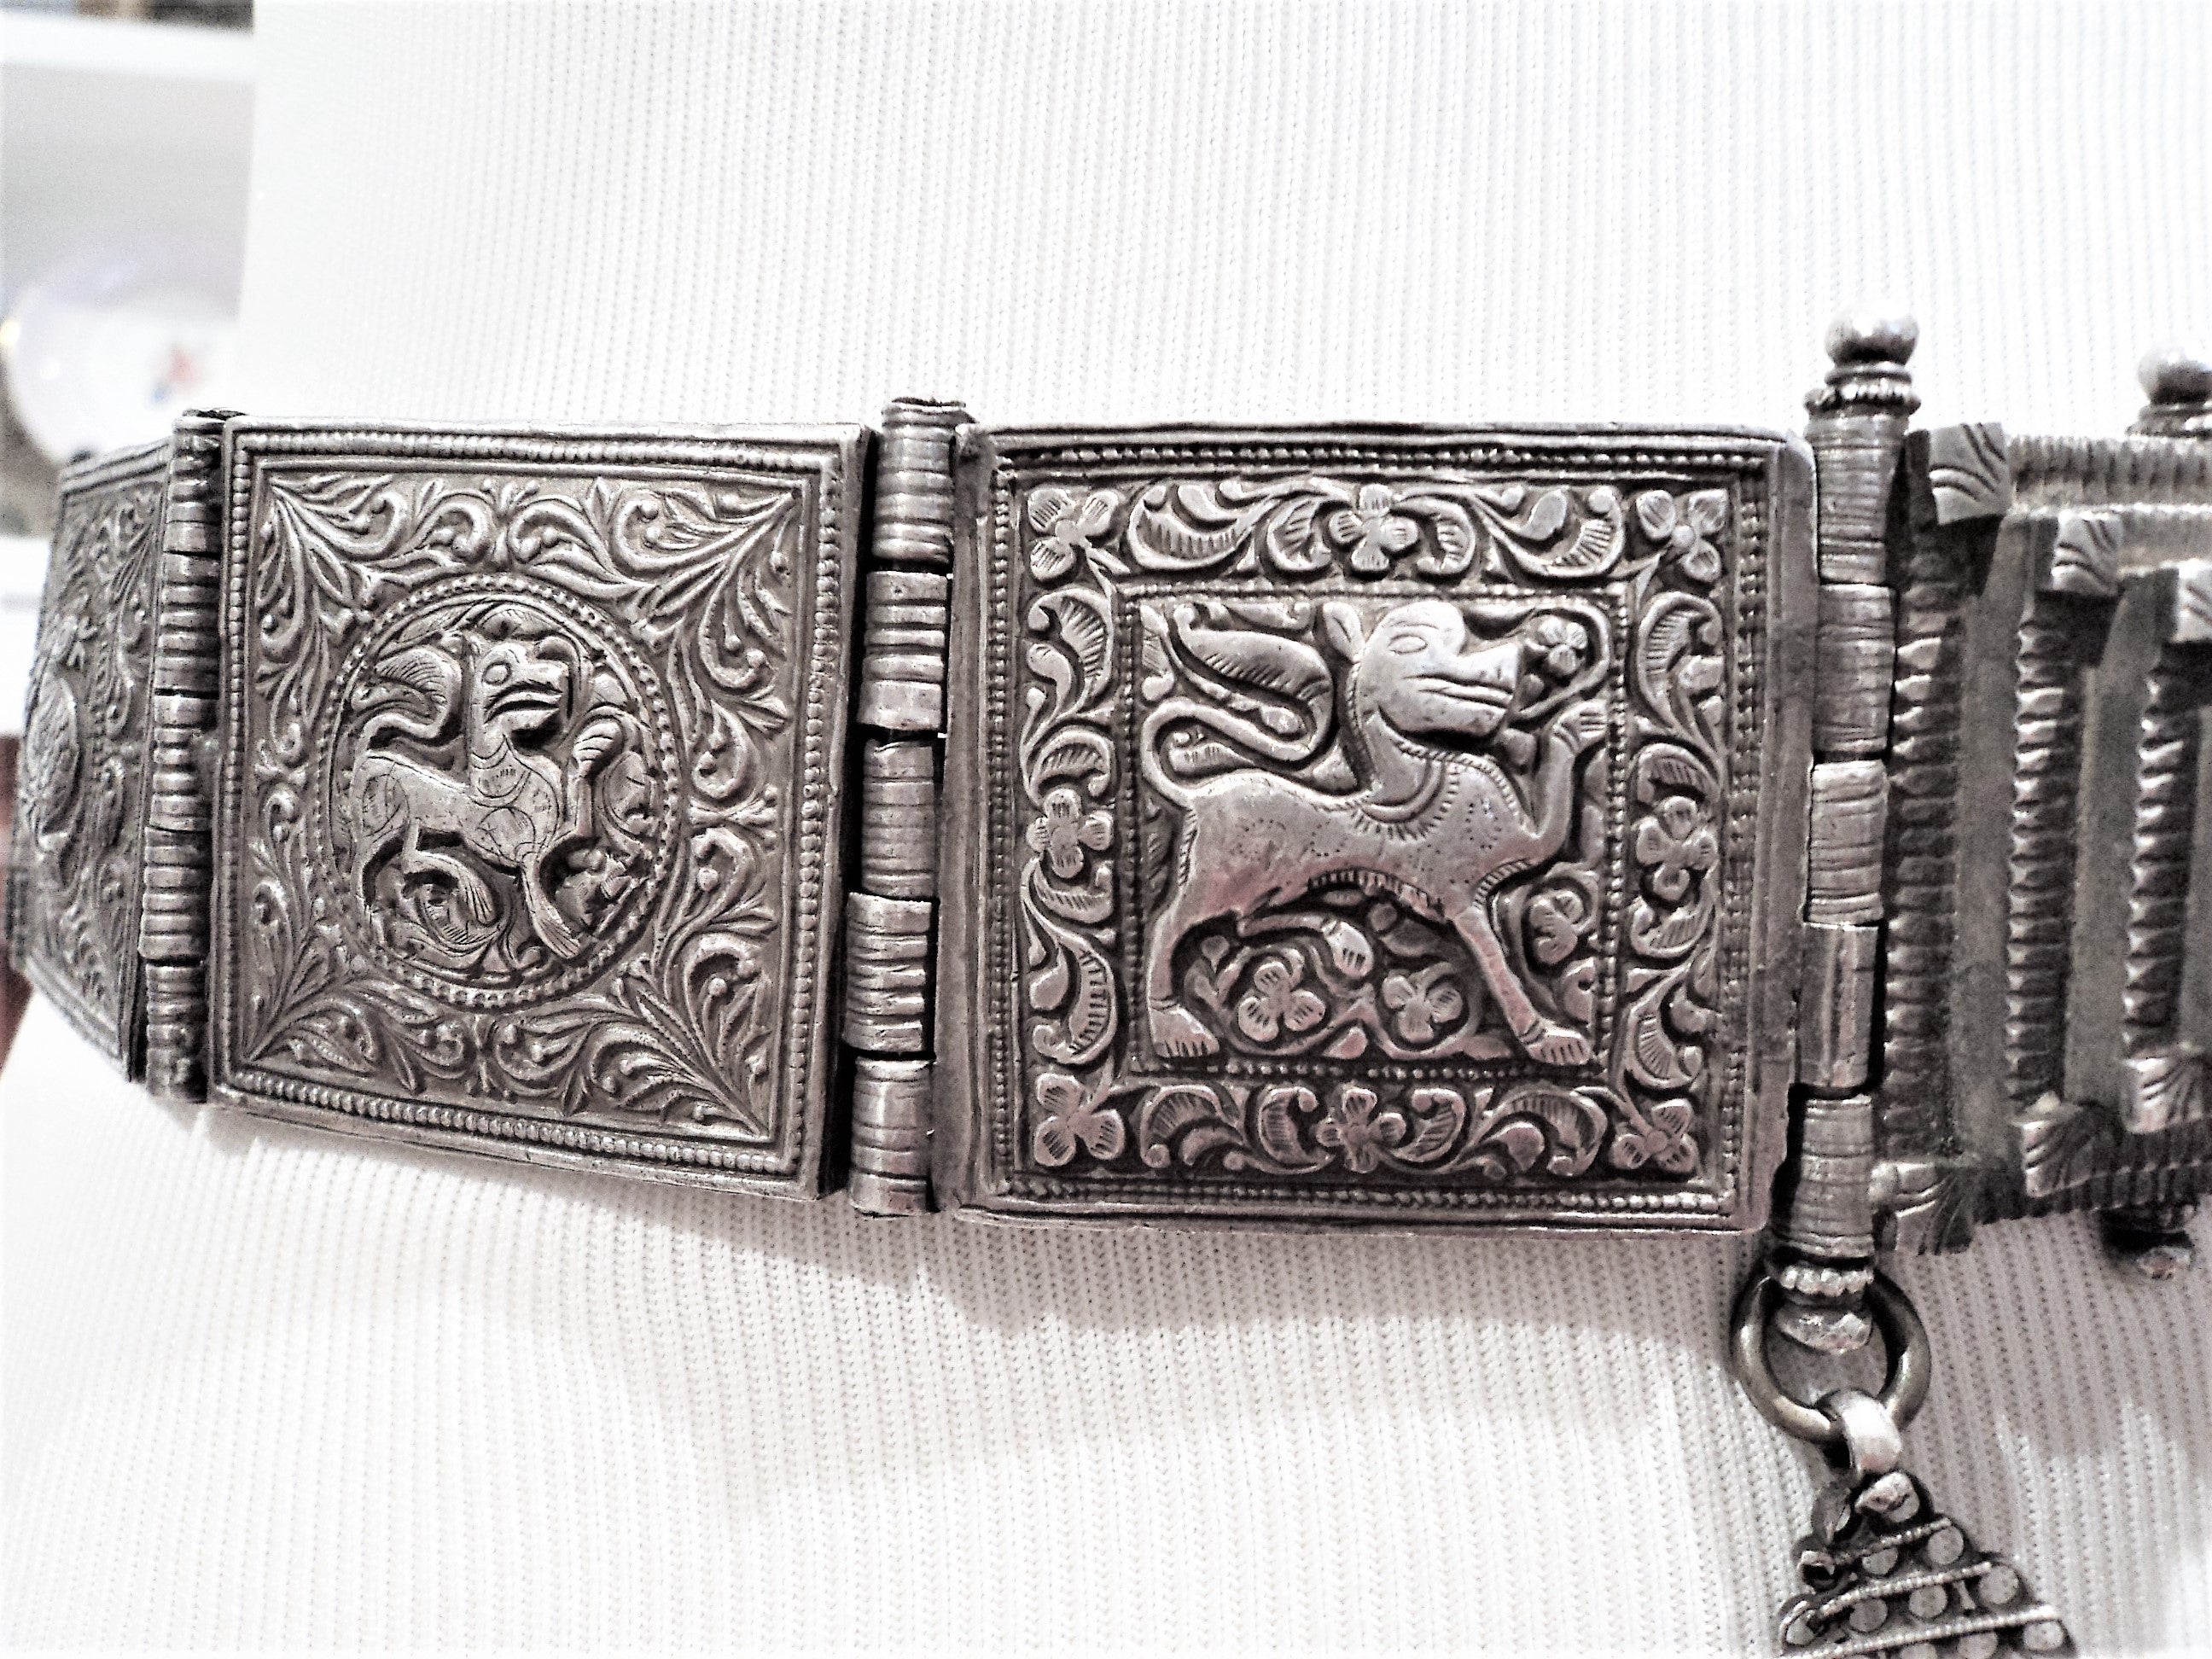 Antique Old Silver Arapatti Indian Tribal Belt